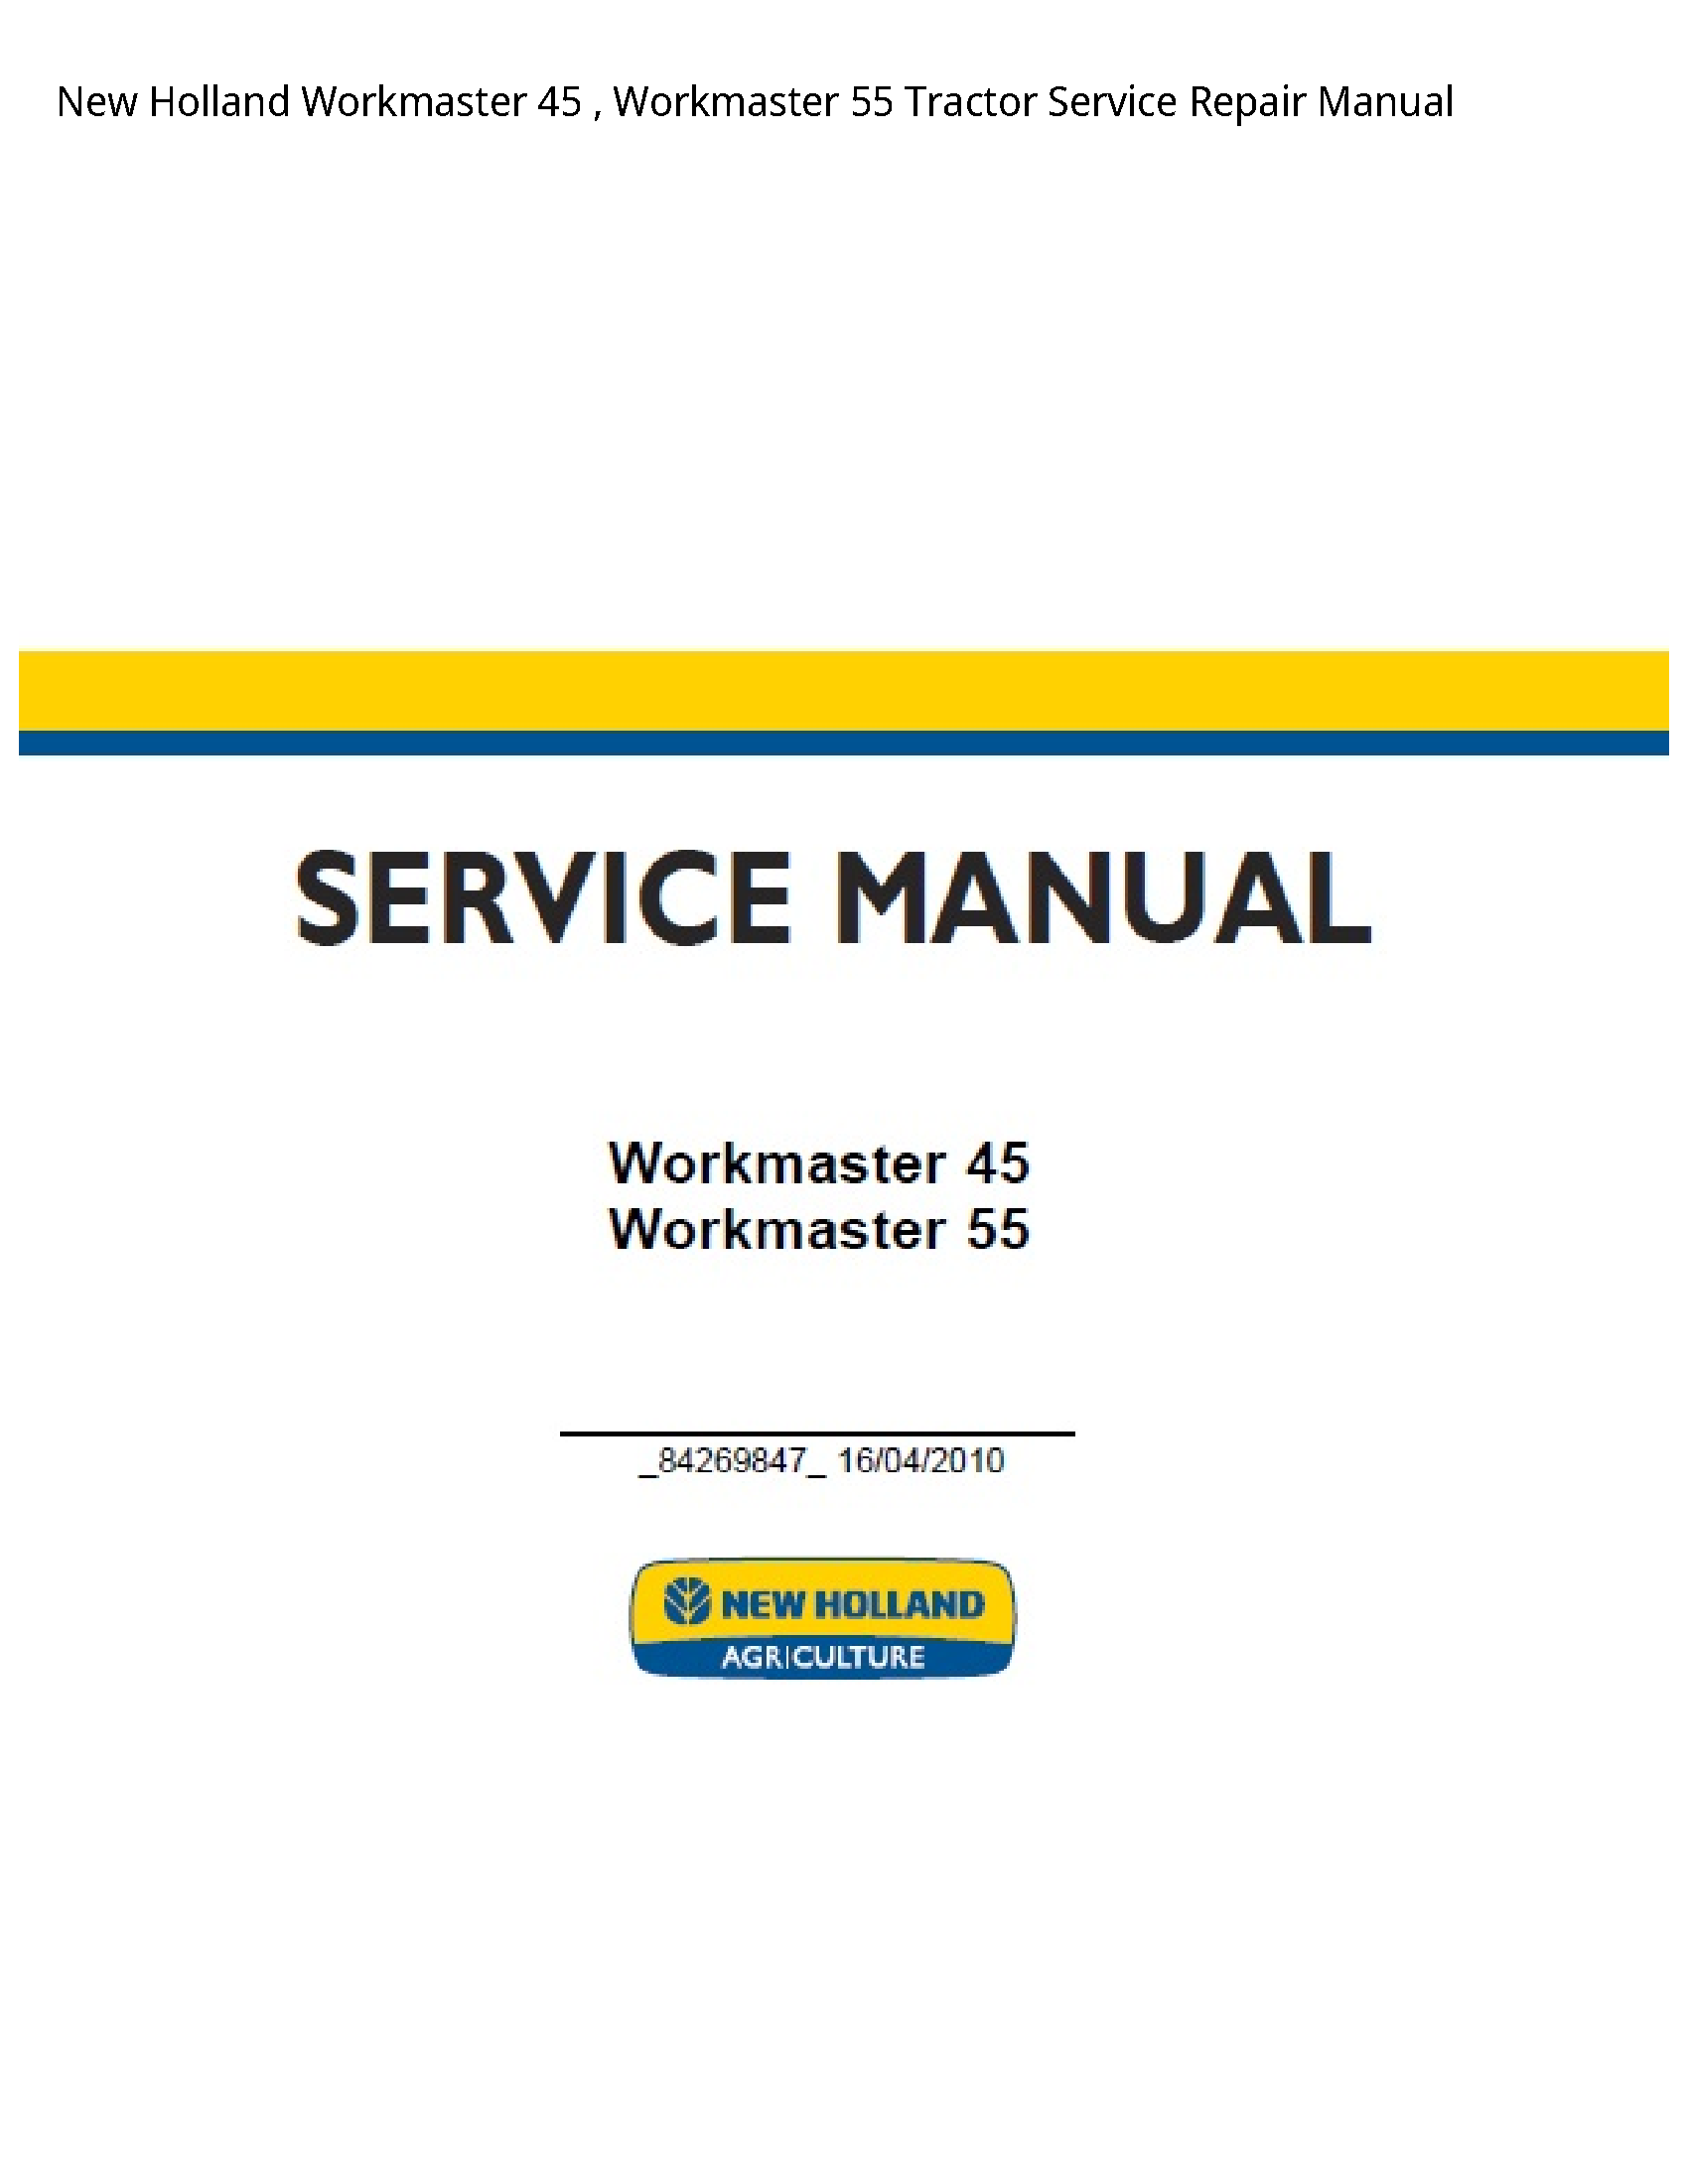 New Holland 45 Workmaster Workmaster Tractor manual